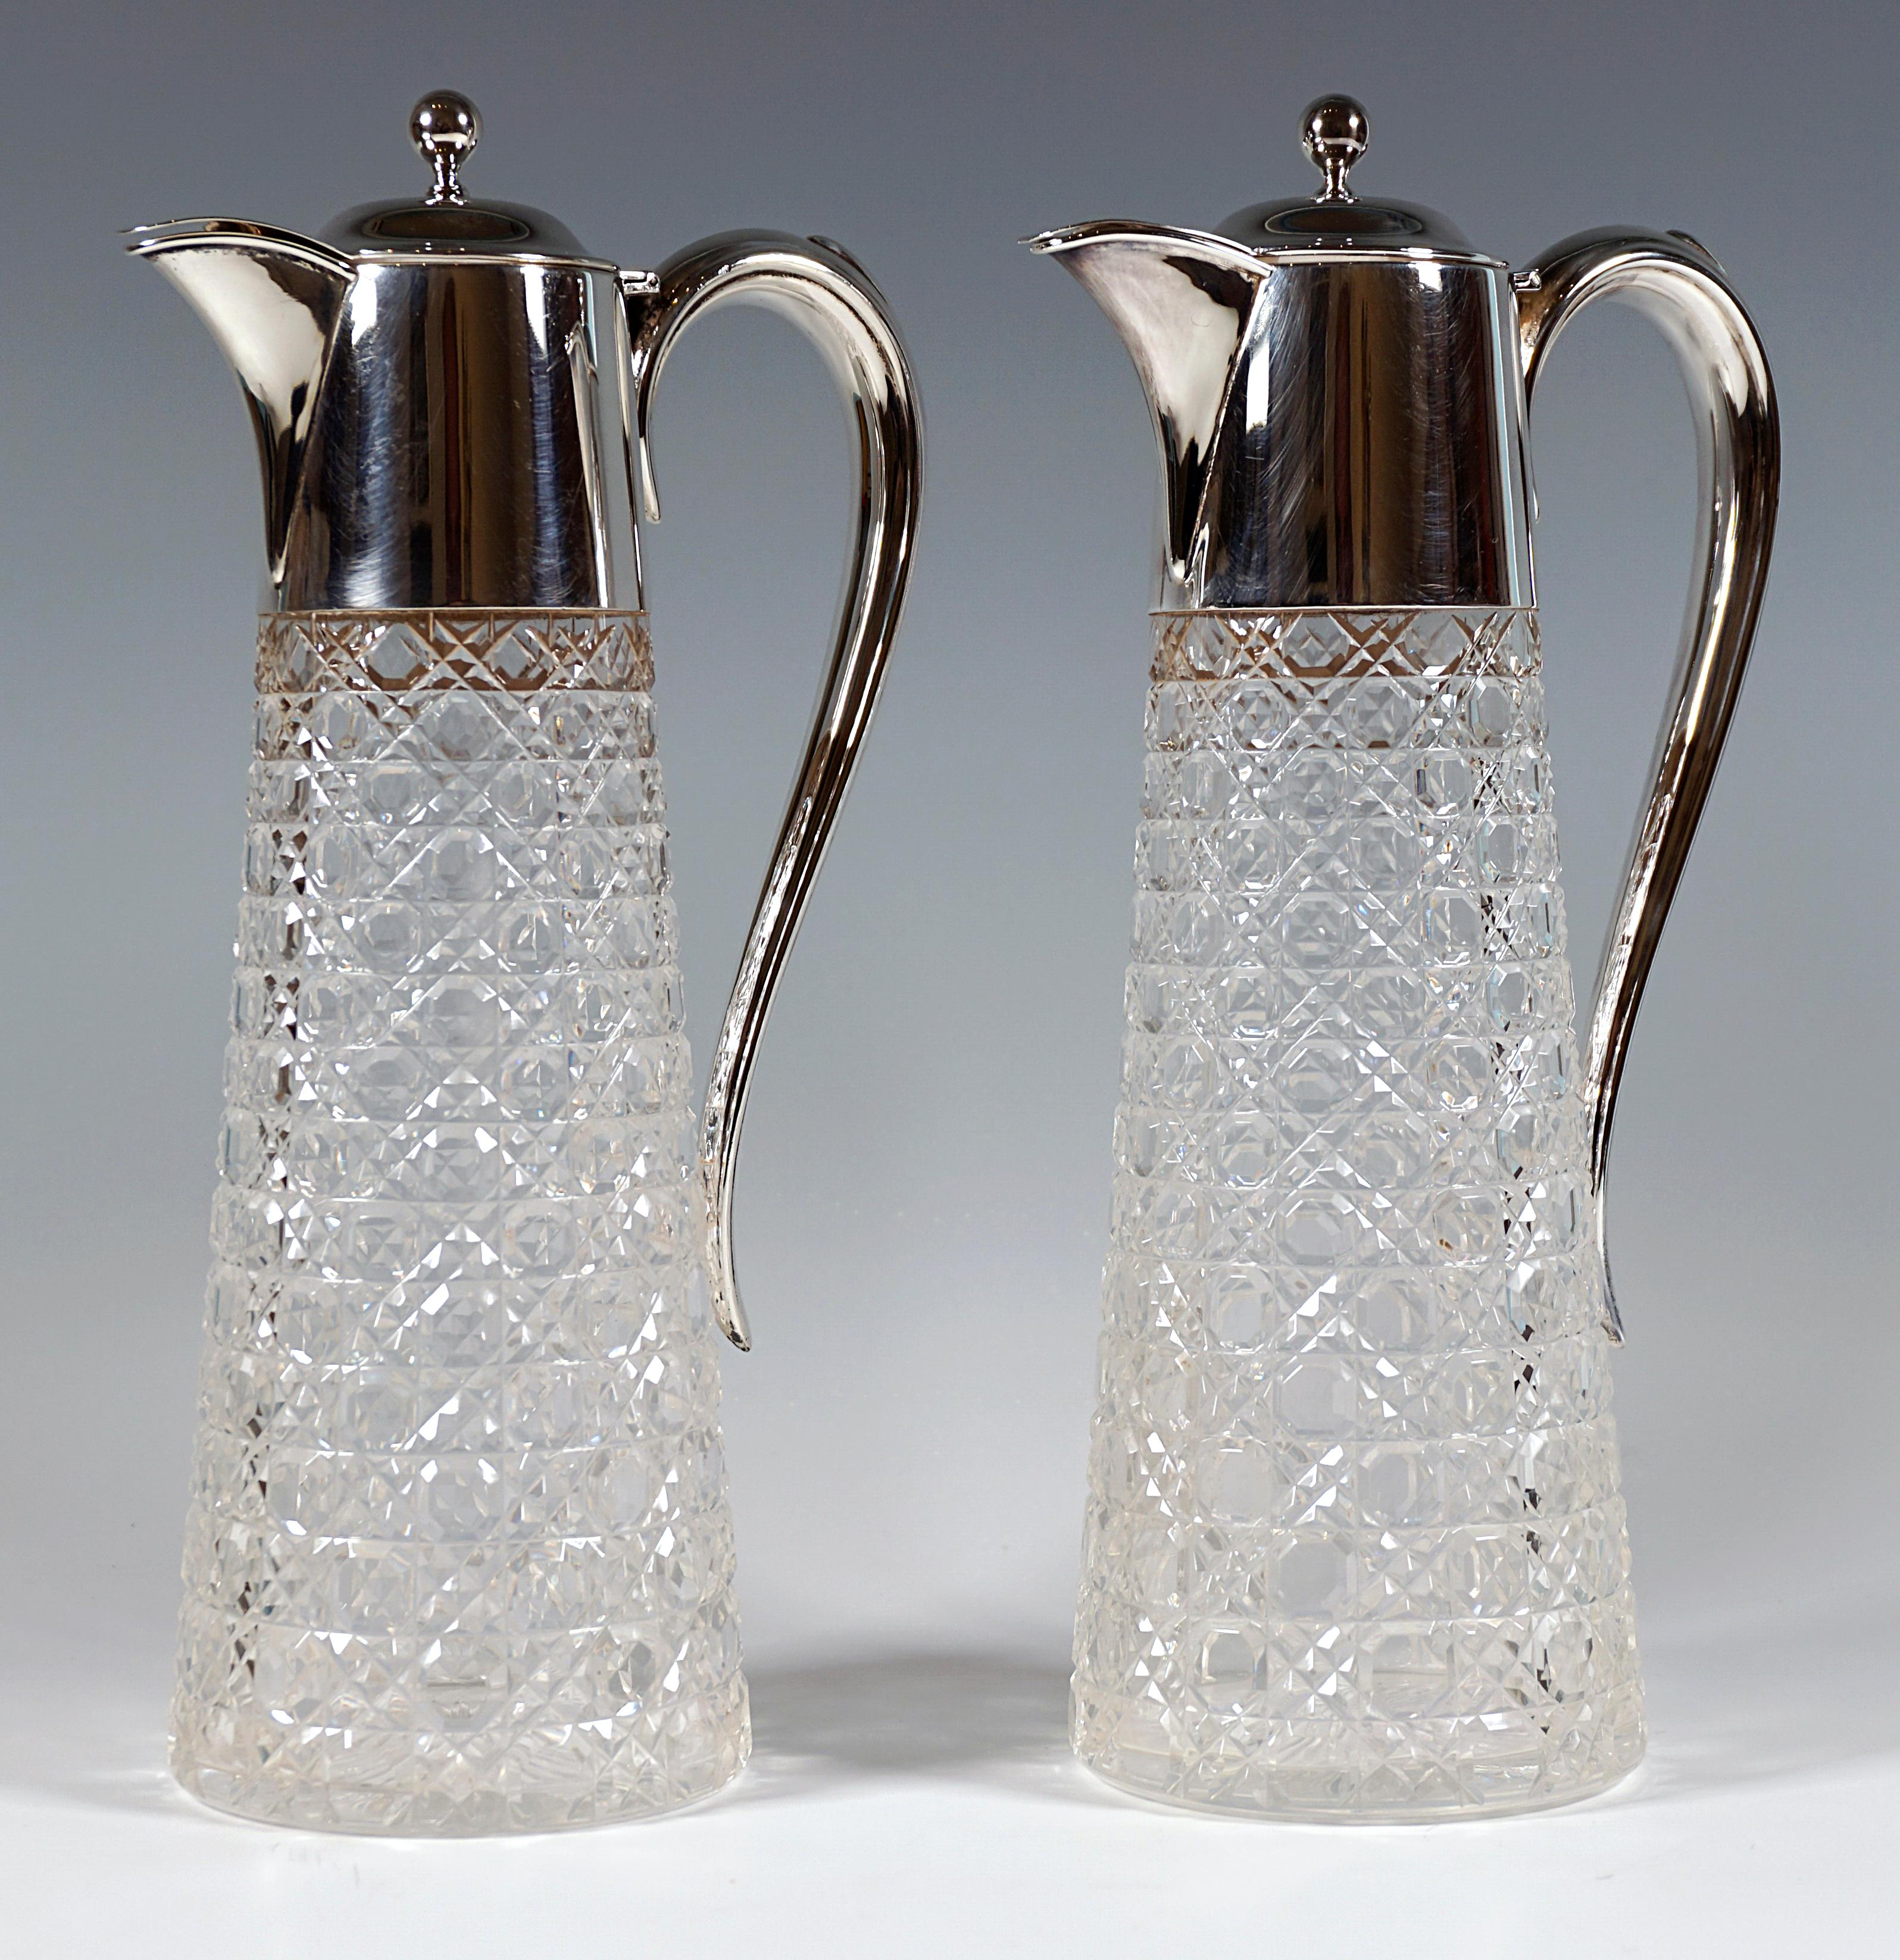 English Pair Of Art Nouveau Carafes With Silver Mount by Barker Brothers Birmingham 1901 For Sale